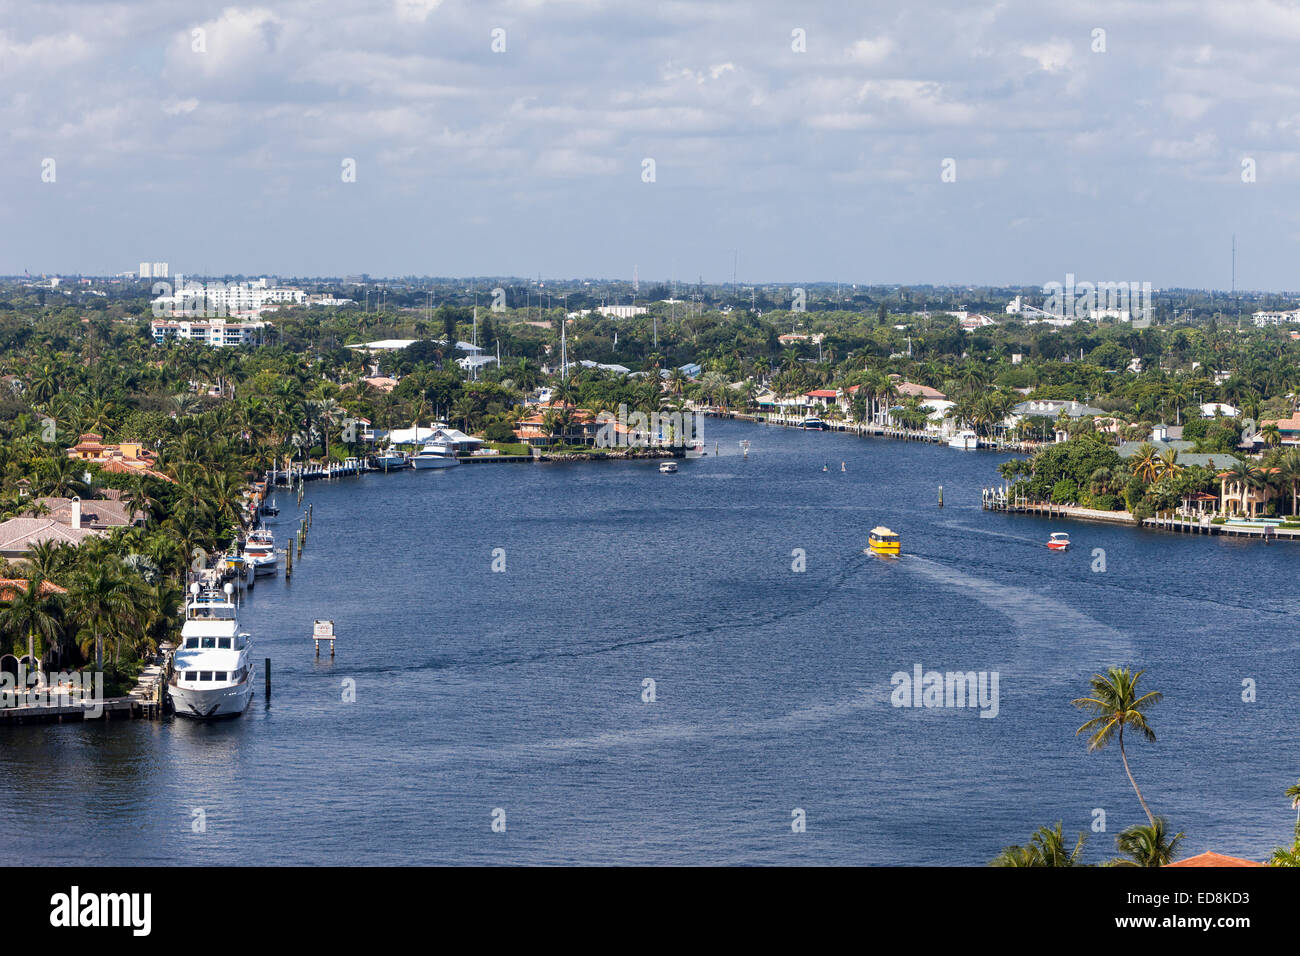 Ft. Lauderdale, Florida. Water Taxi in the Intracoastal waterway. Stock Photo